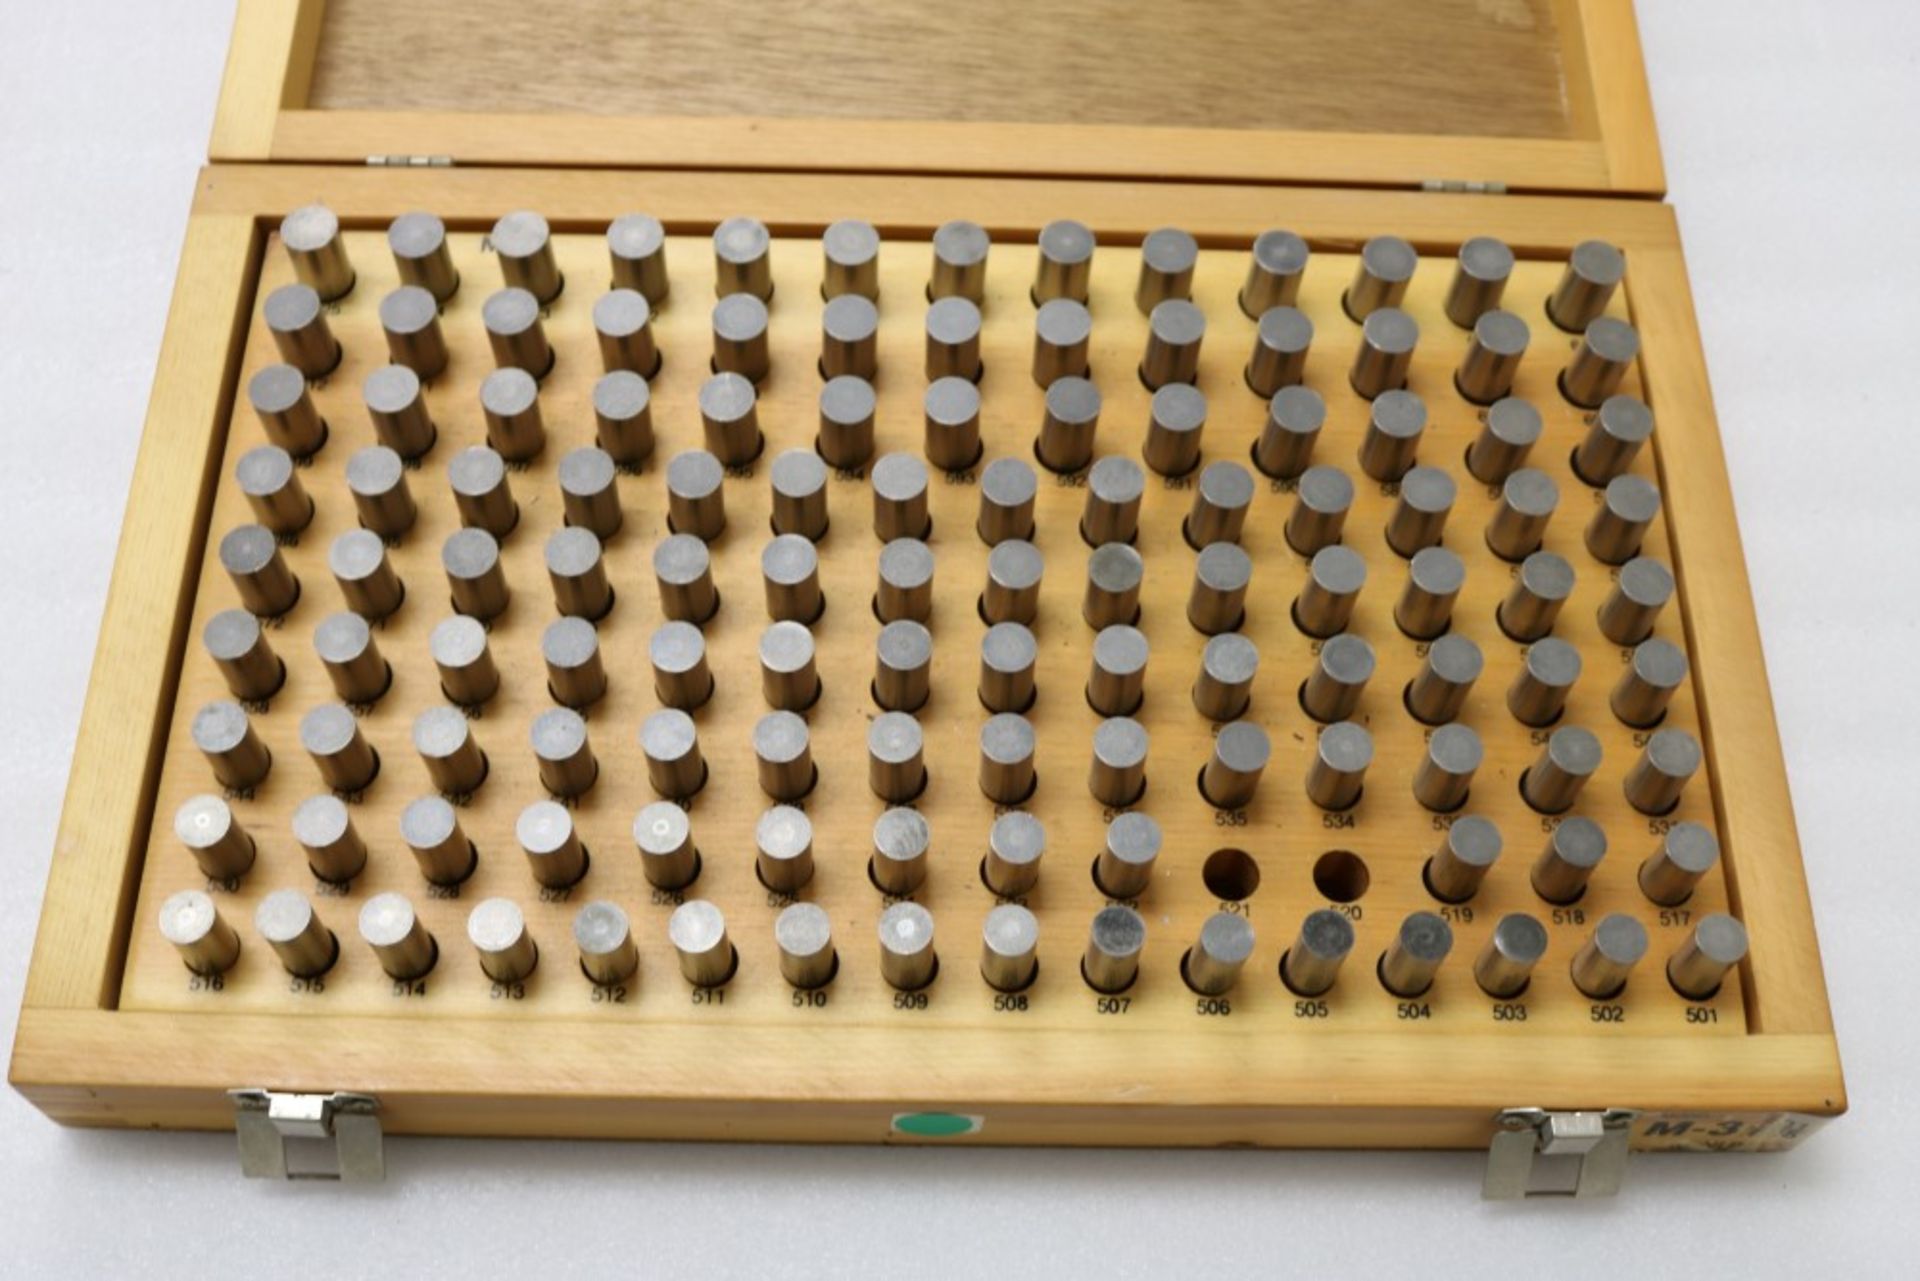 Meyer Pin Gage Set, M3 501-625 Missing 521 and 520 - Image 2 of 3